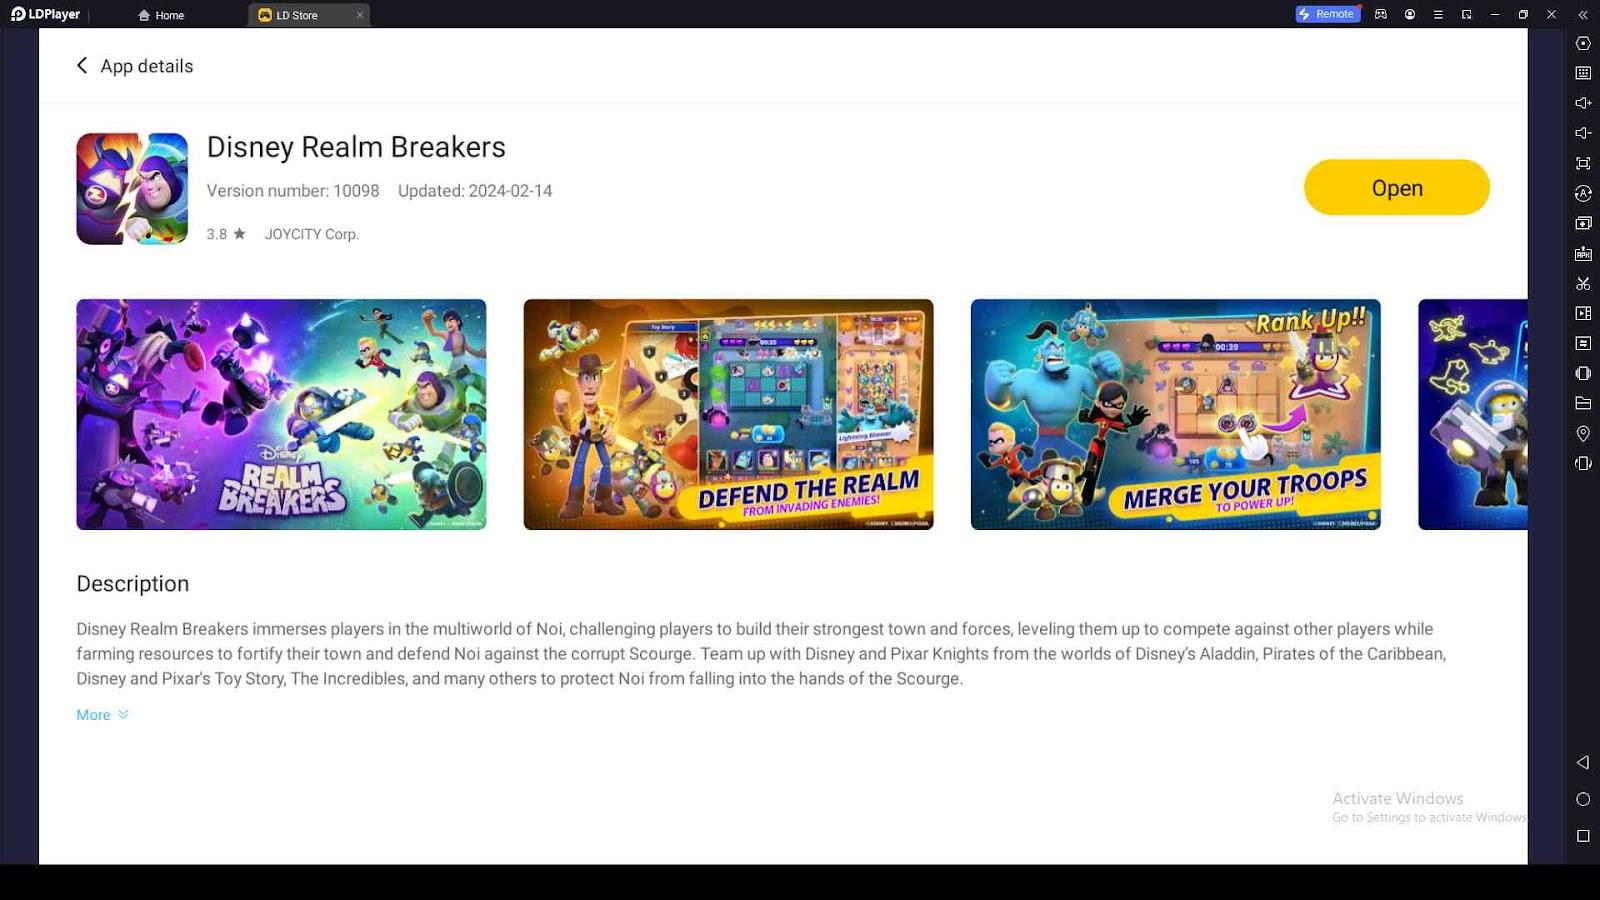 Playing Disney Realm Breakers on LDPlayer